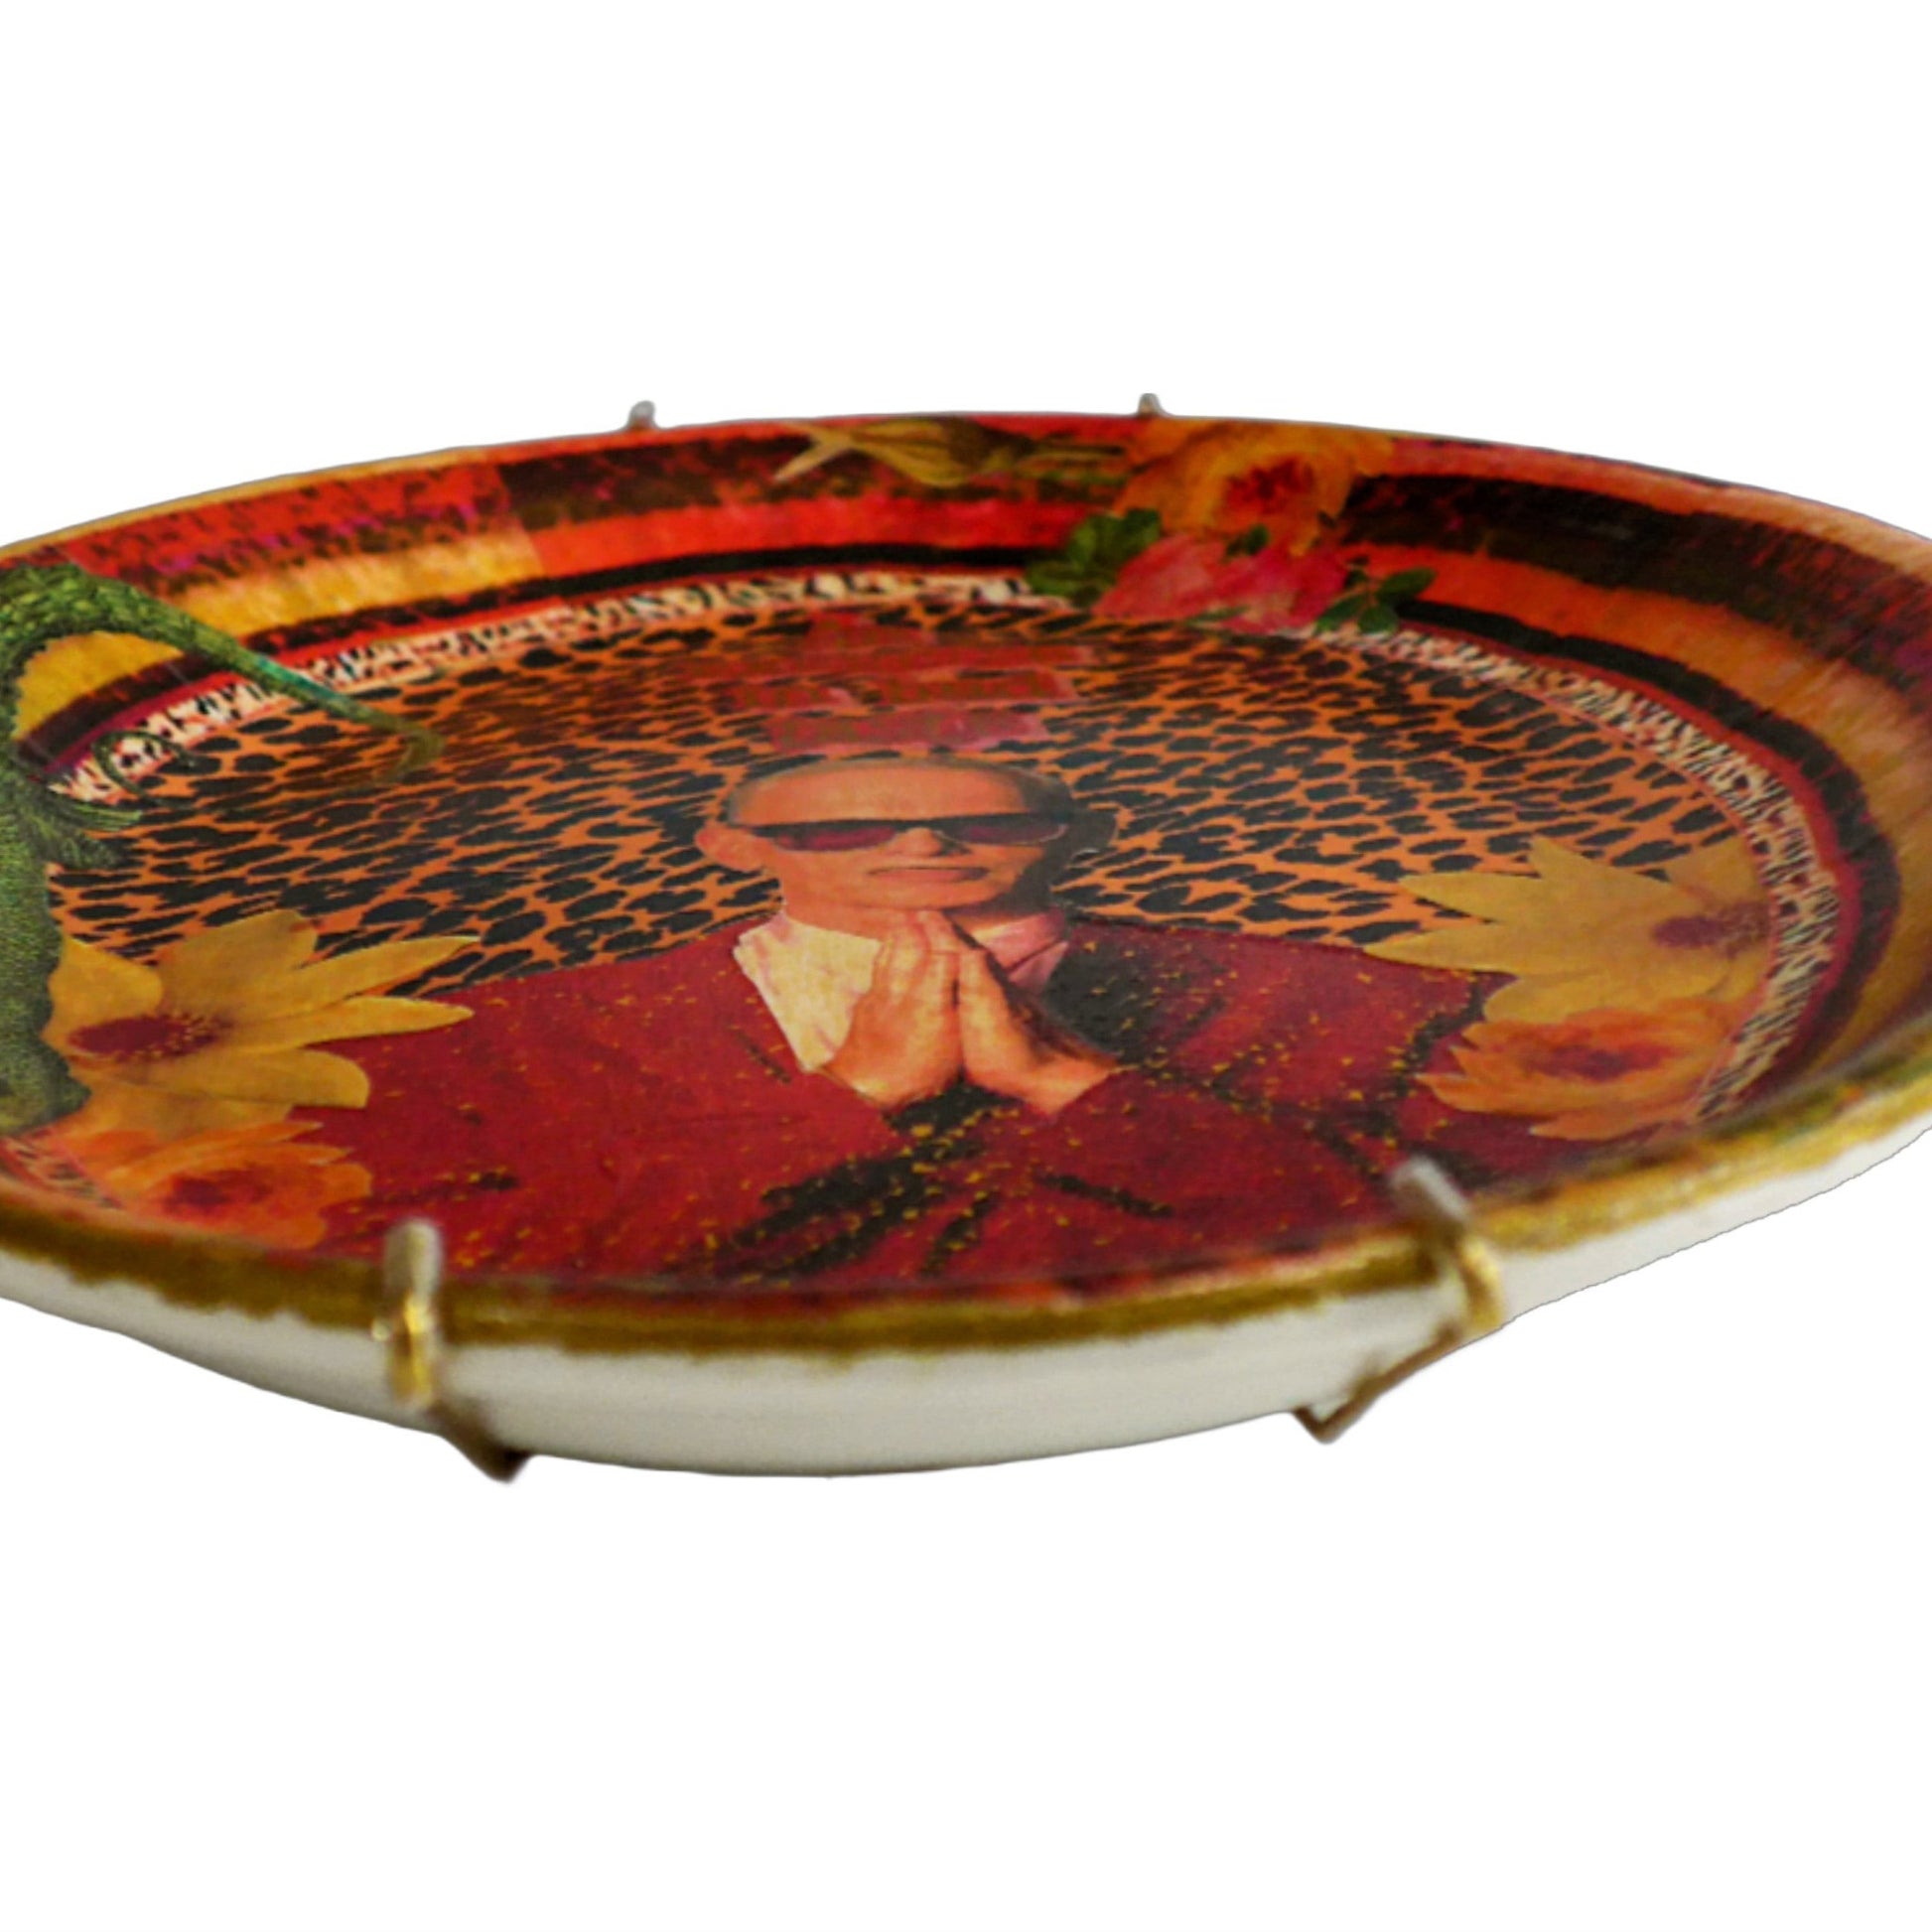 House of Frisson John Waters Inspired Orange Leopard Print  Wall Plate details